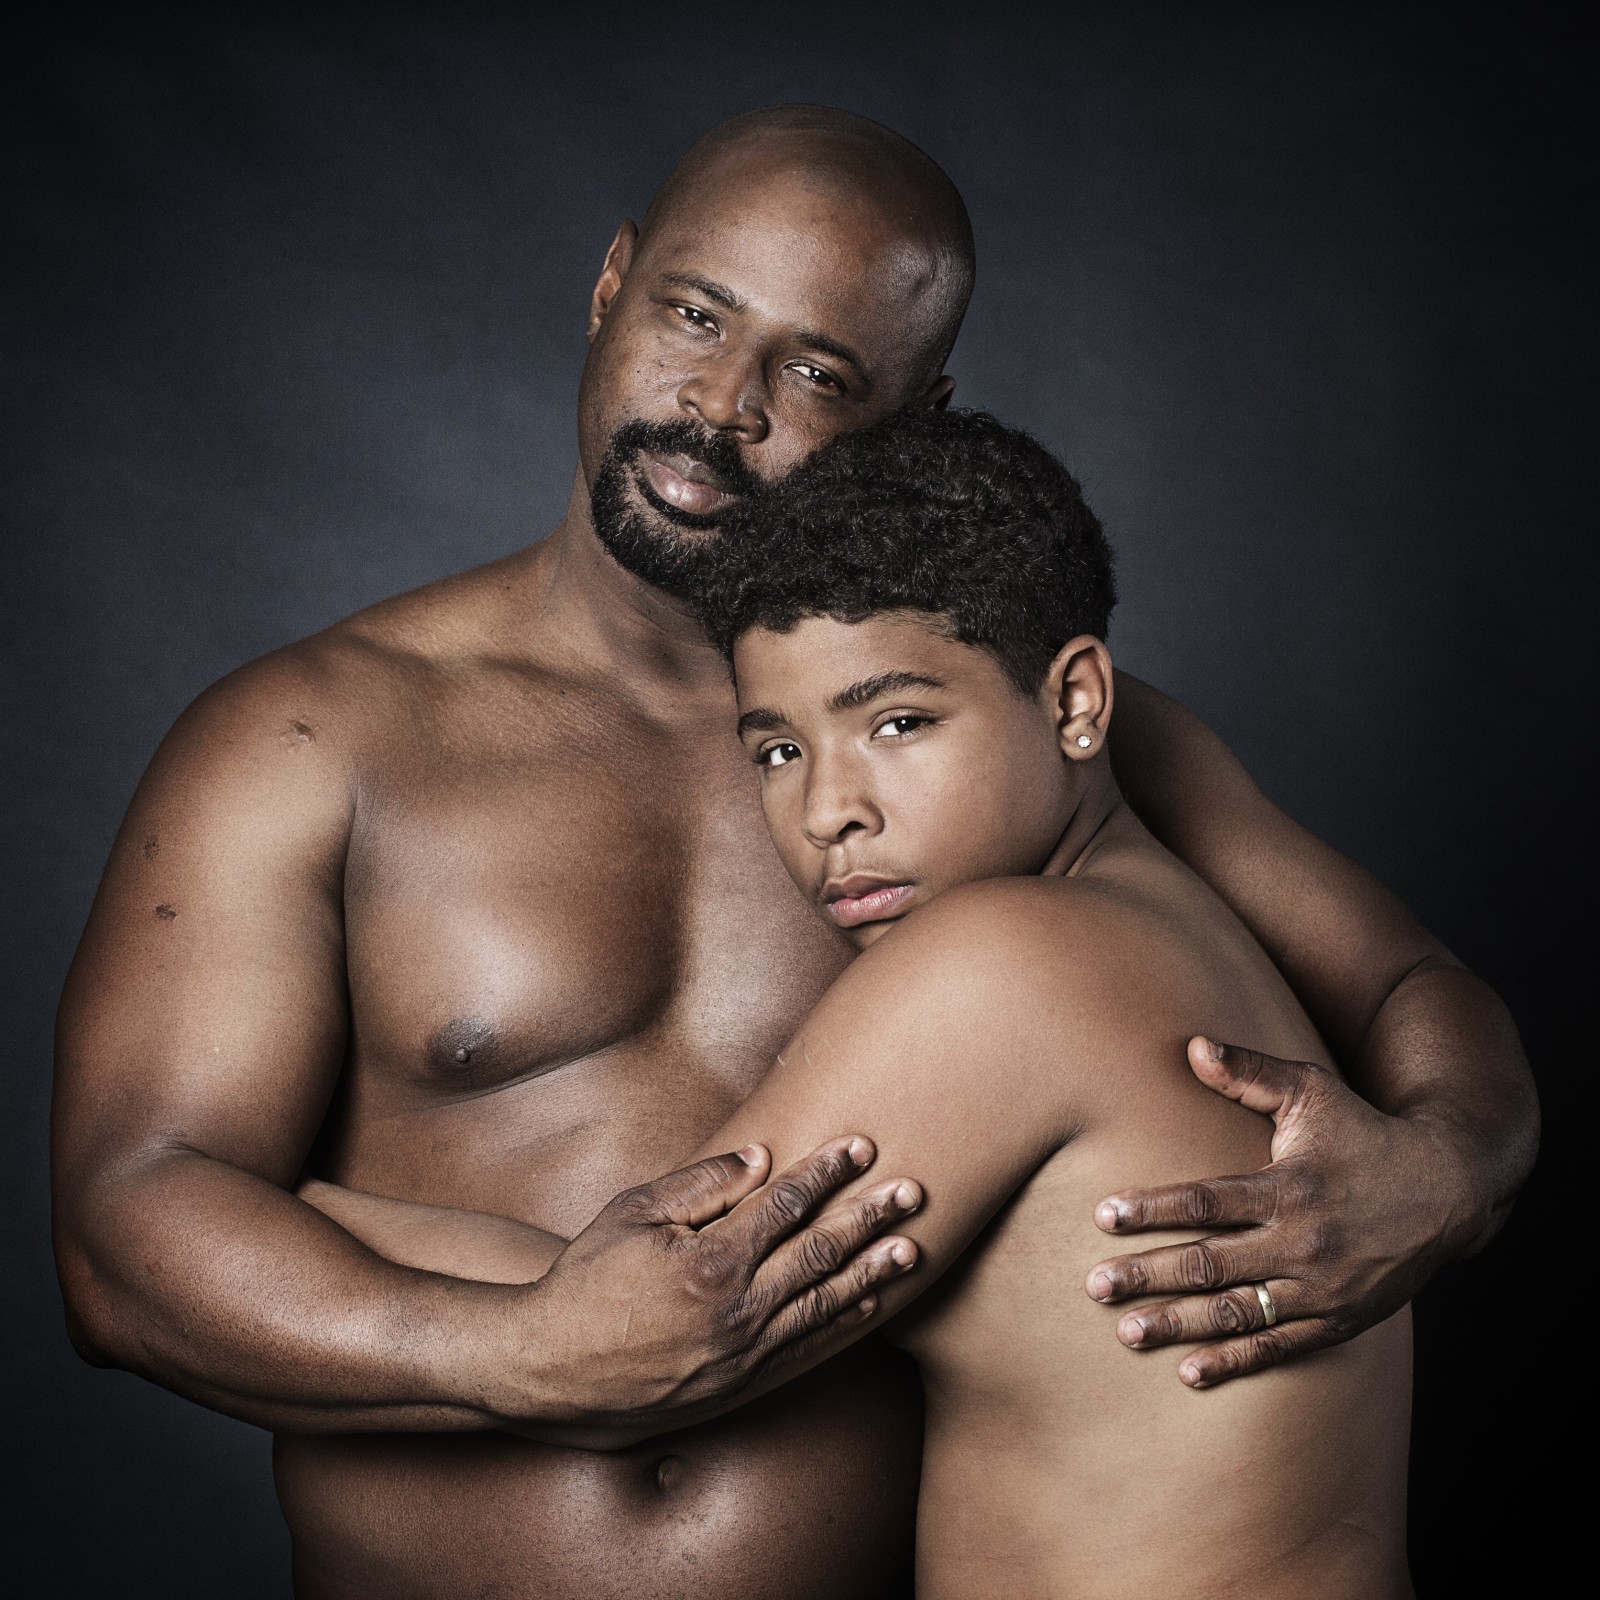 angela dubiel recommends Fathers And Sons Naked Together